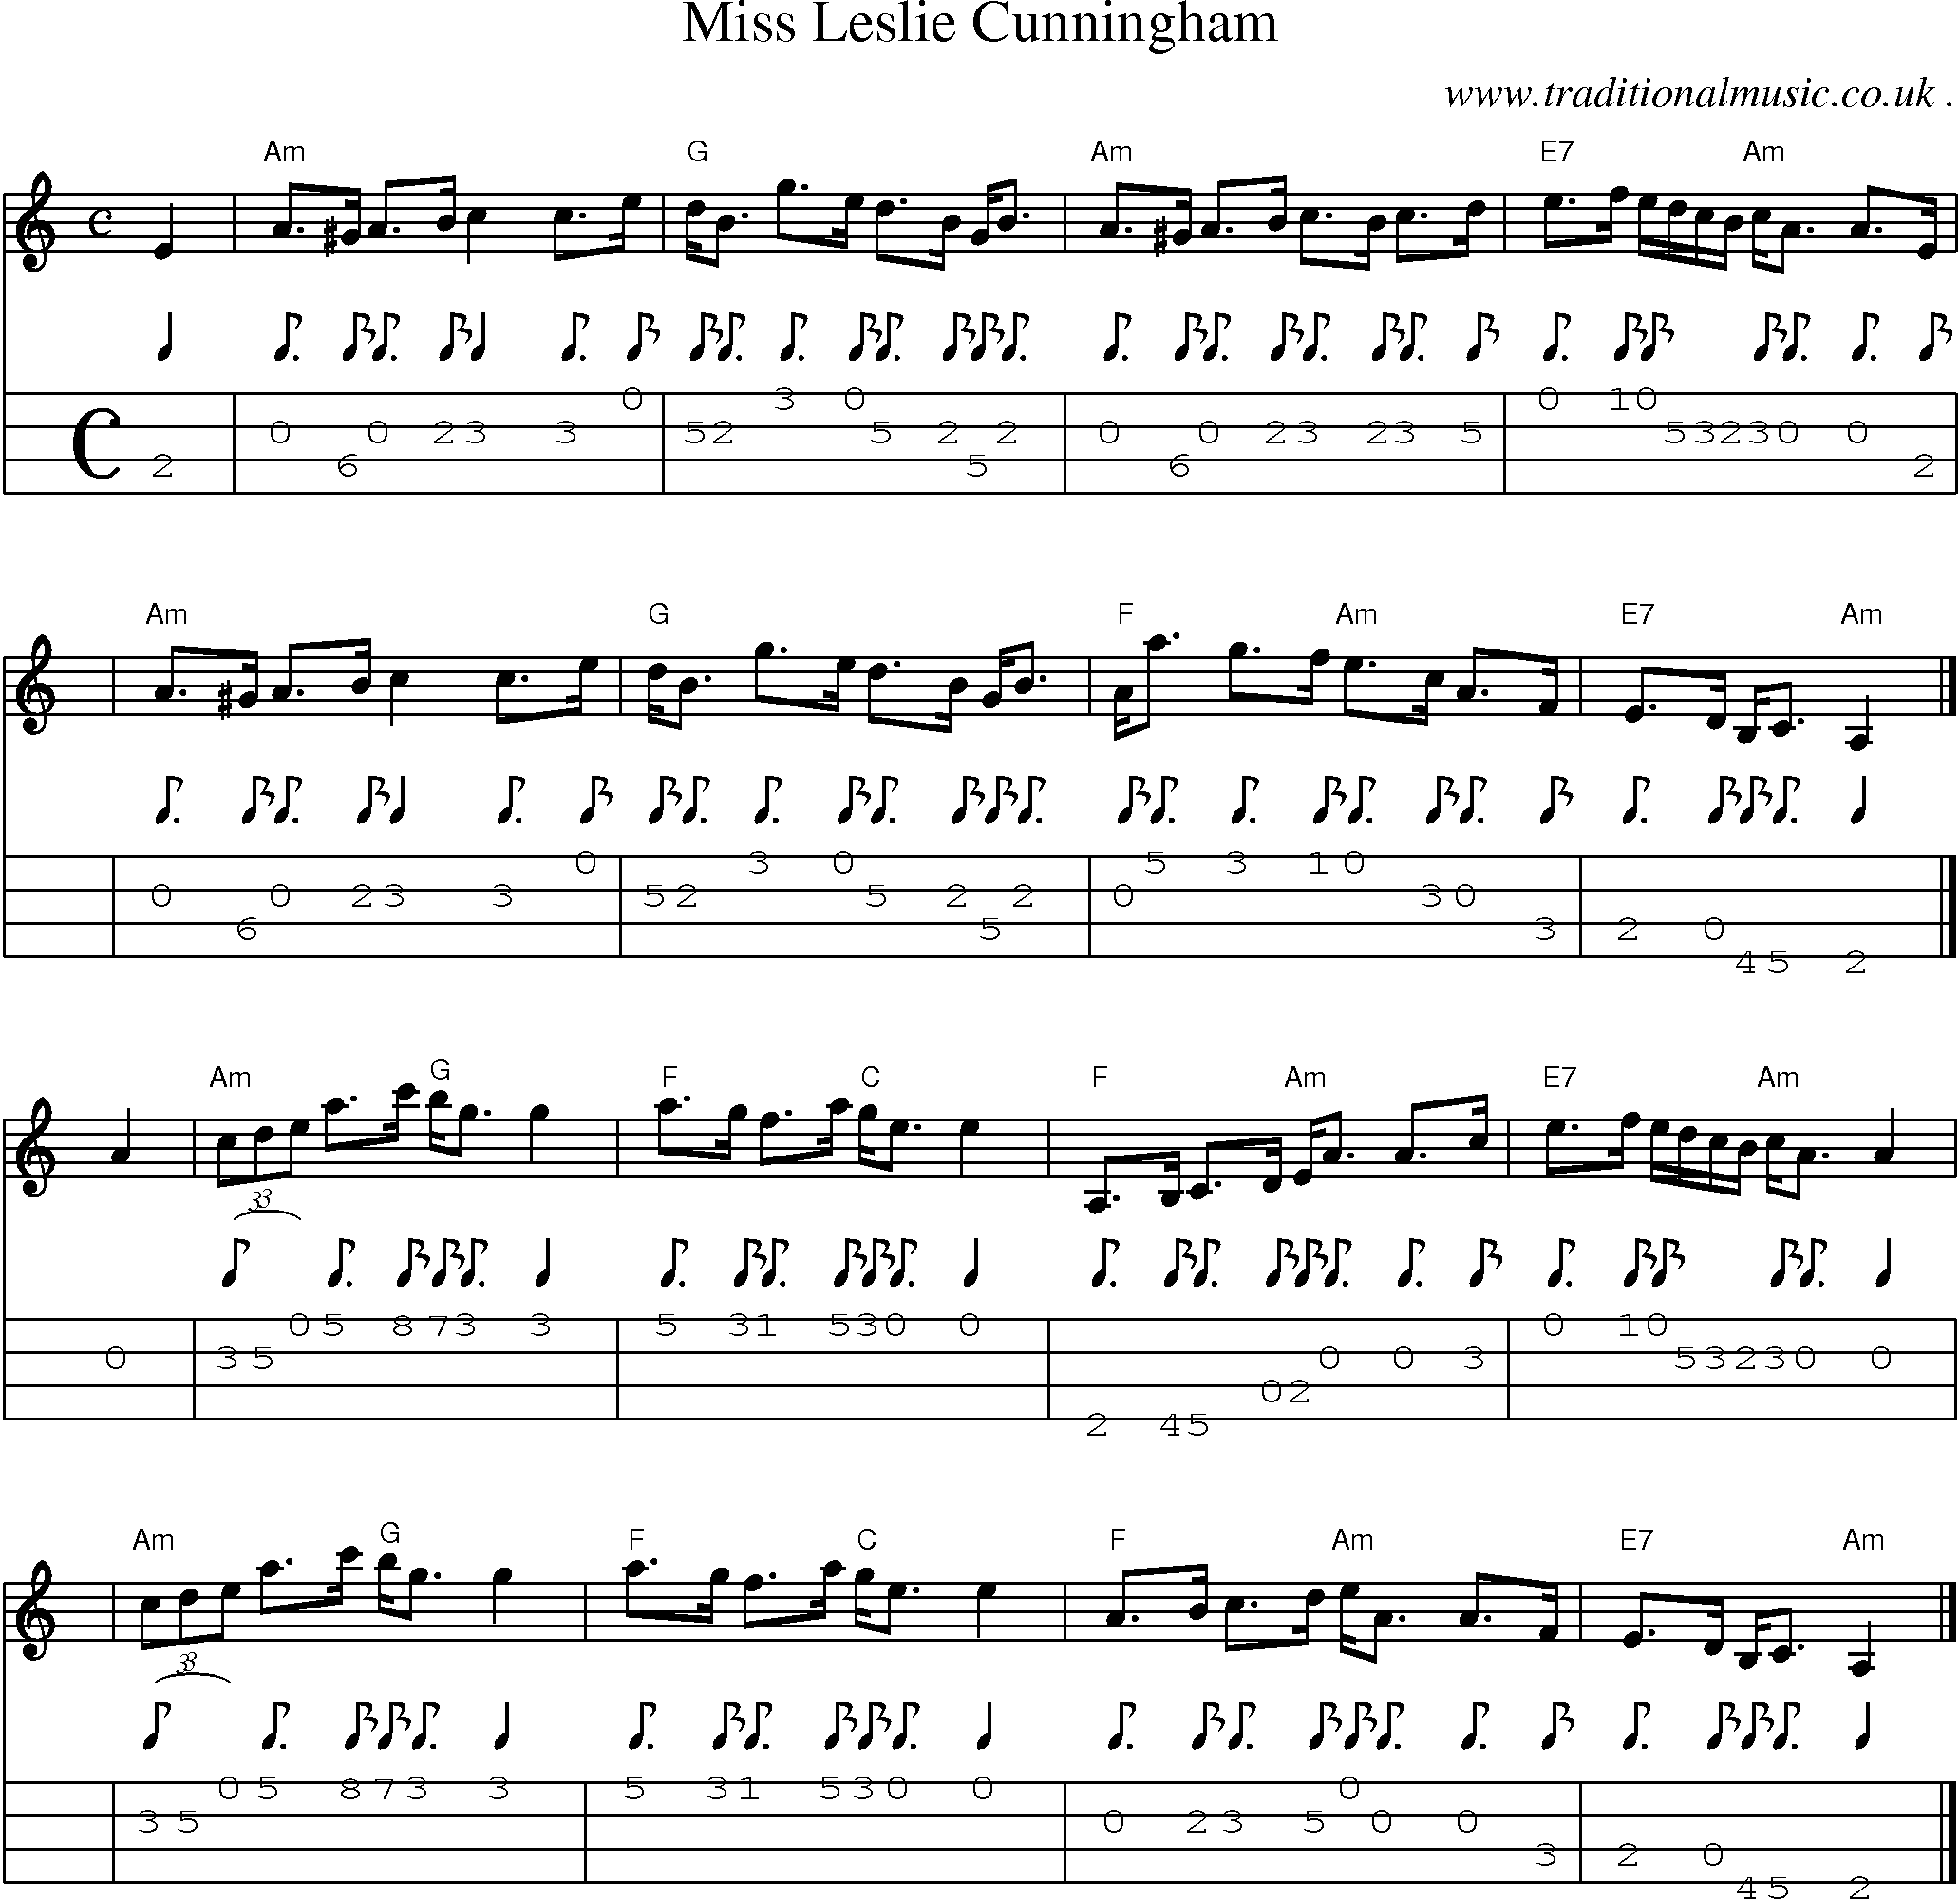 Sheet-music  score, Chords and Mandolin Tabs for Miss Leslie Cunningham